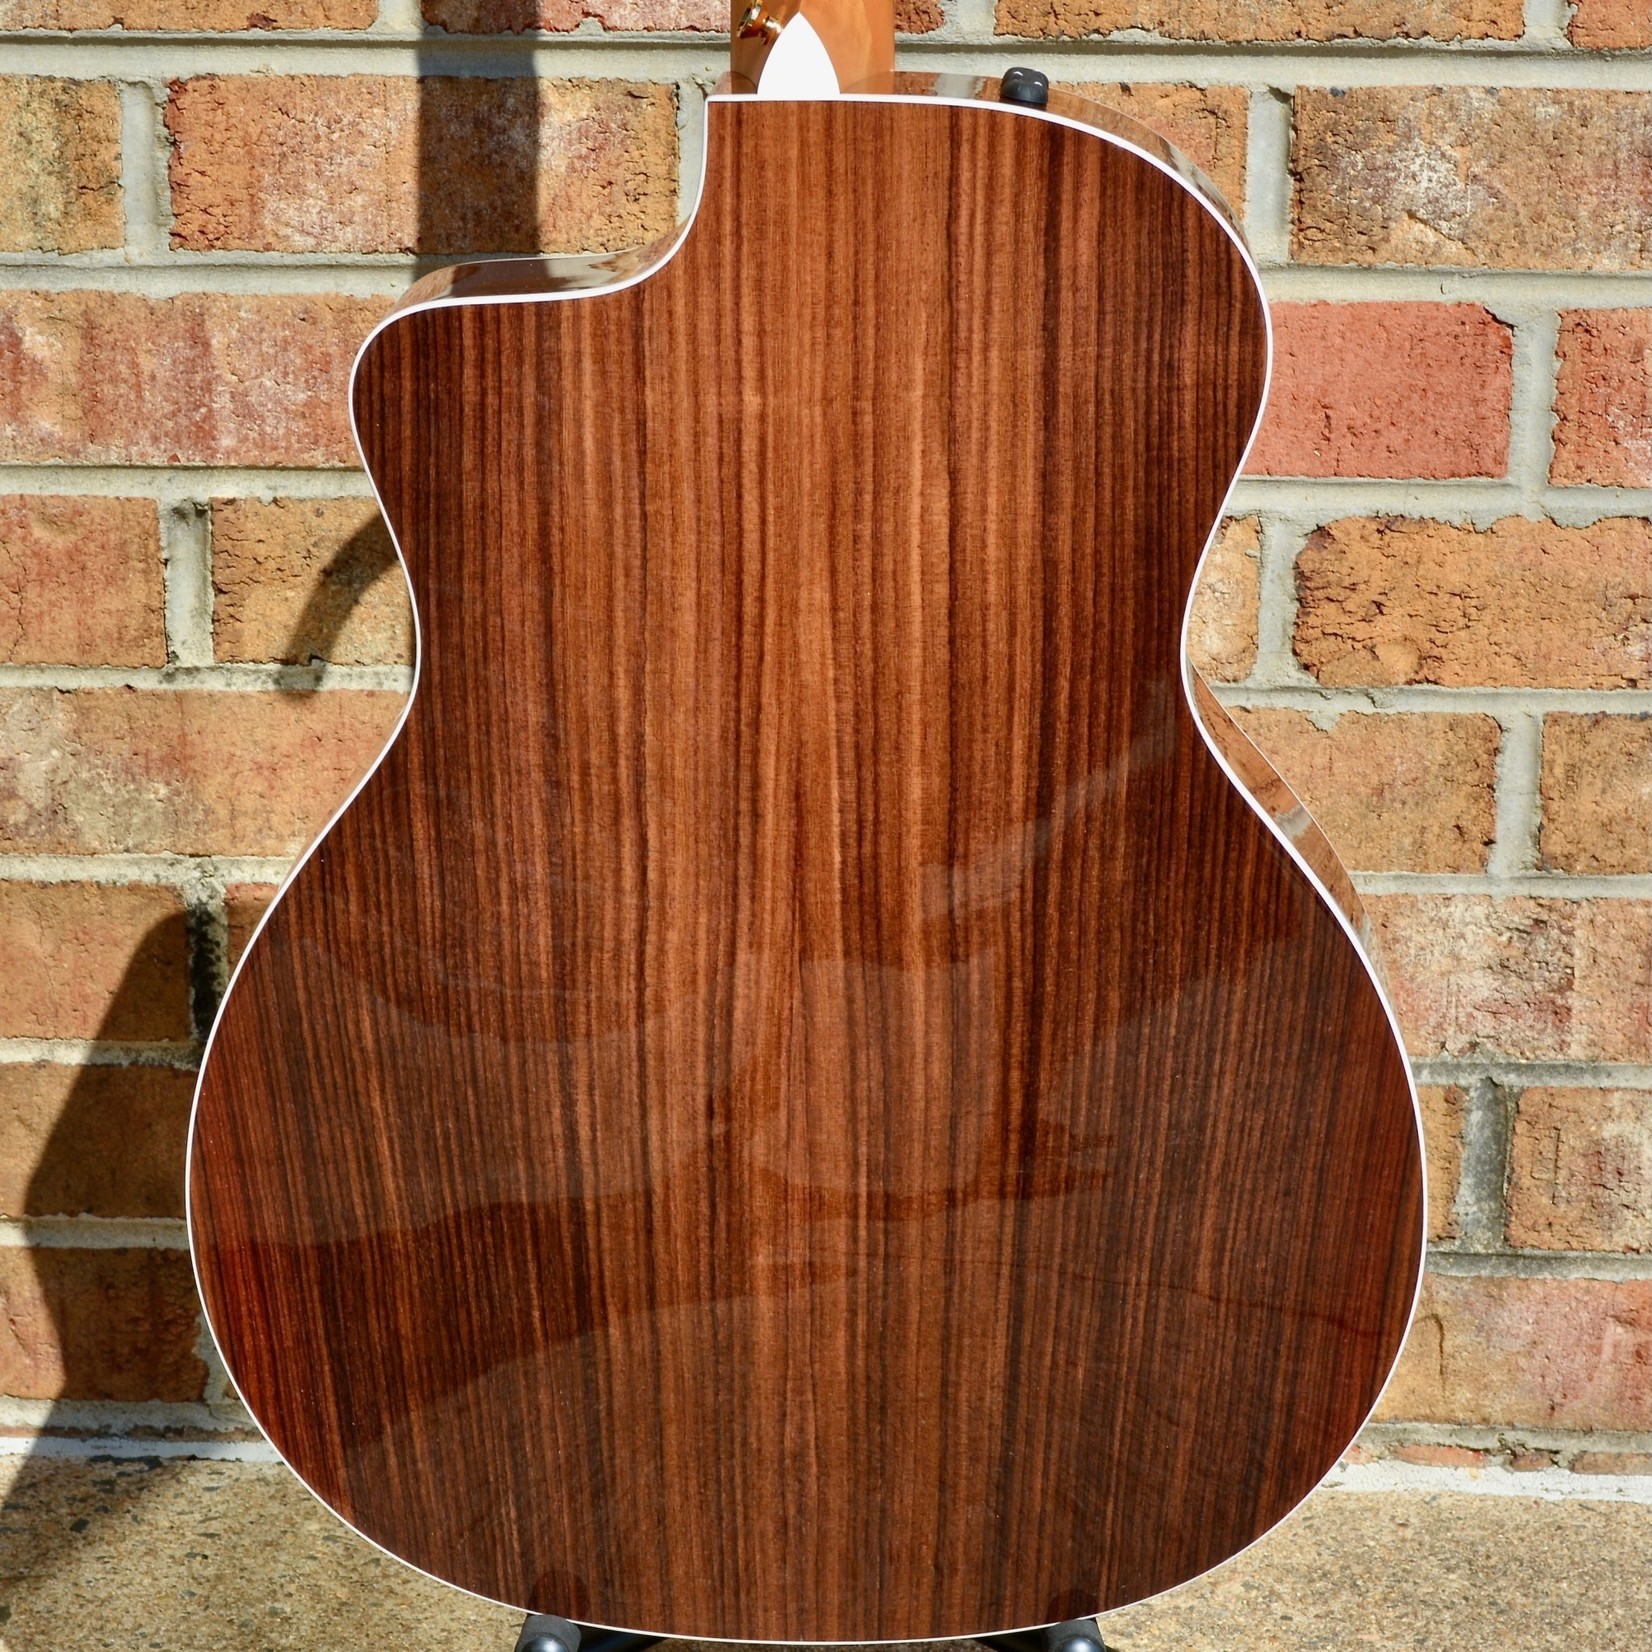 Taylor Taylor 214ce DLX Rosewood